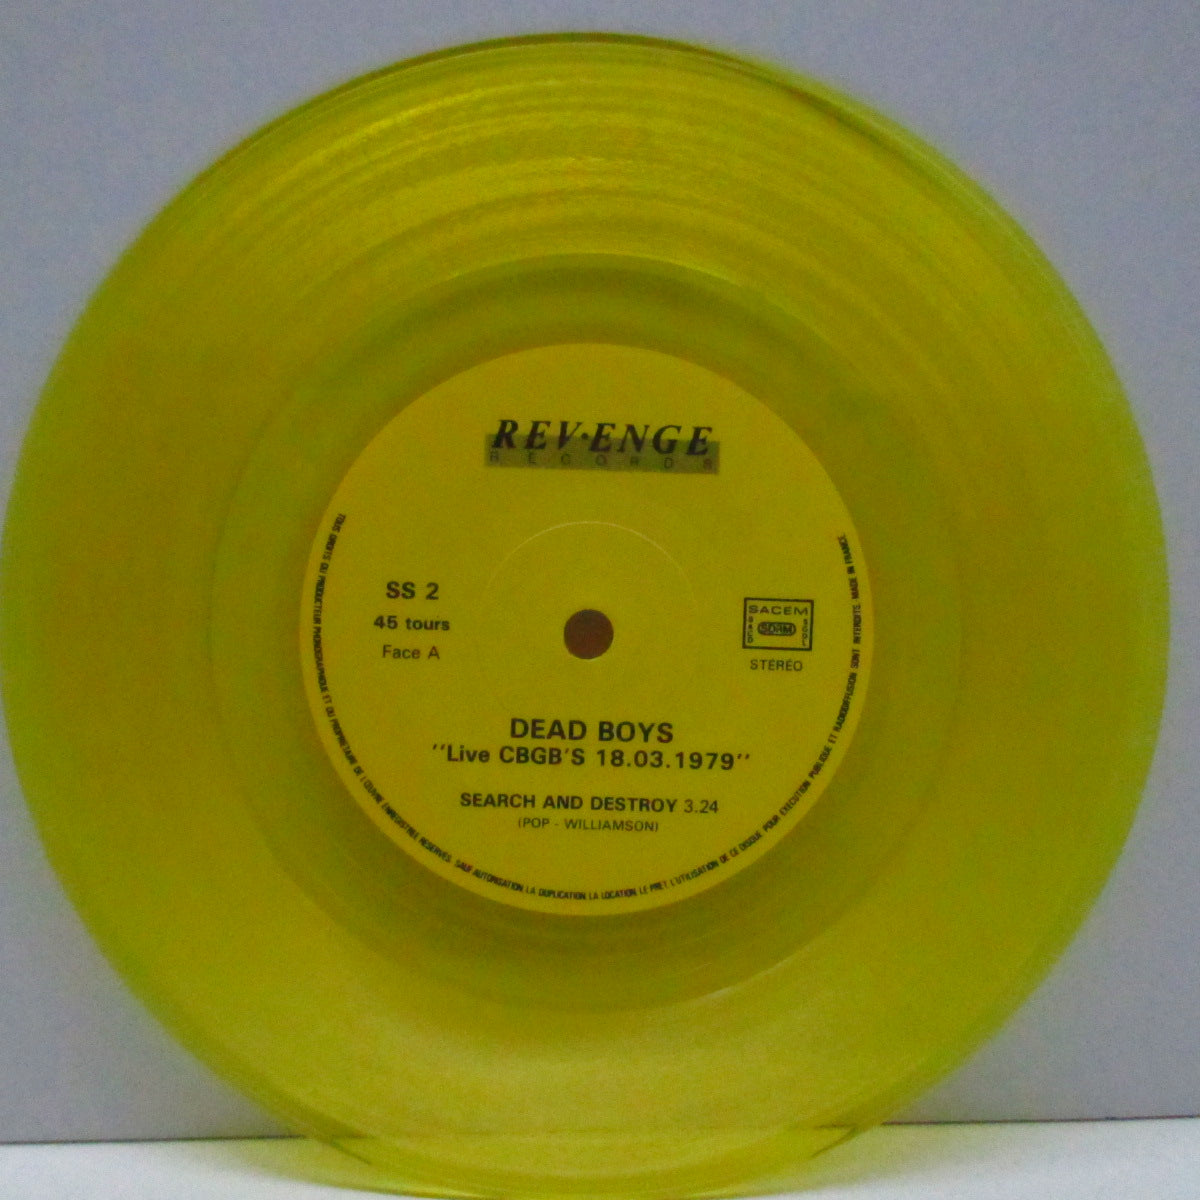 DEAD BOYS (デッド・ボーイズ) - Search And Destroy (France Ltd.Yellow Vinyl 7)